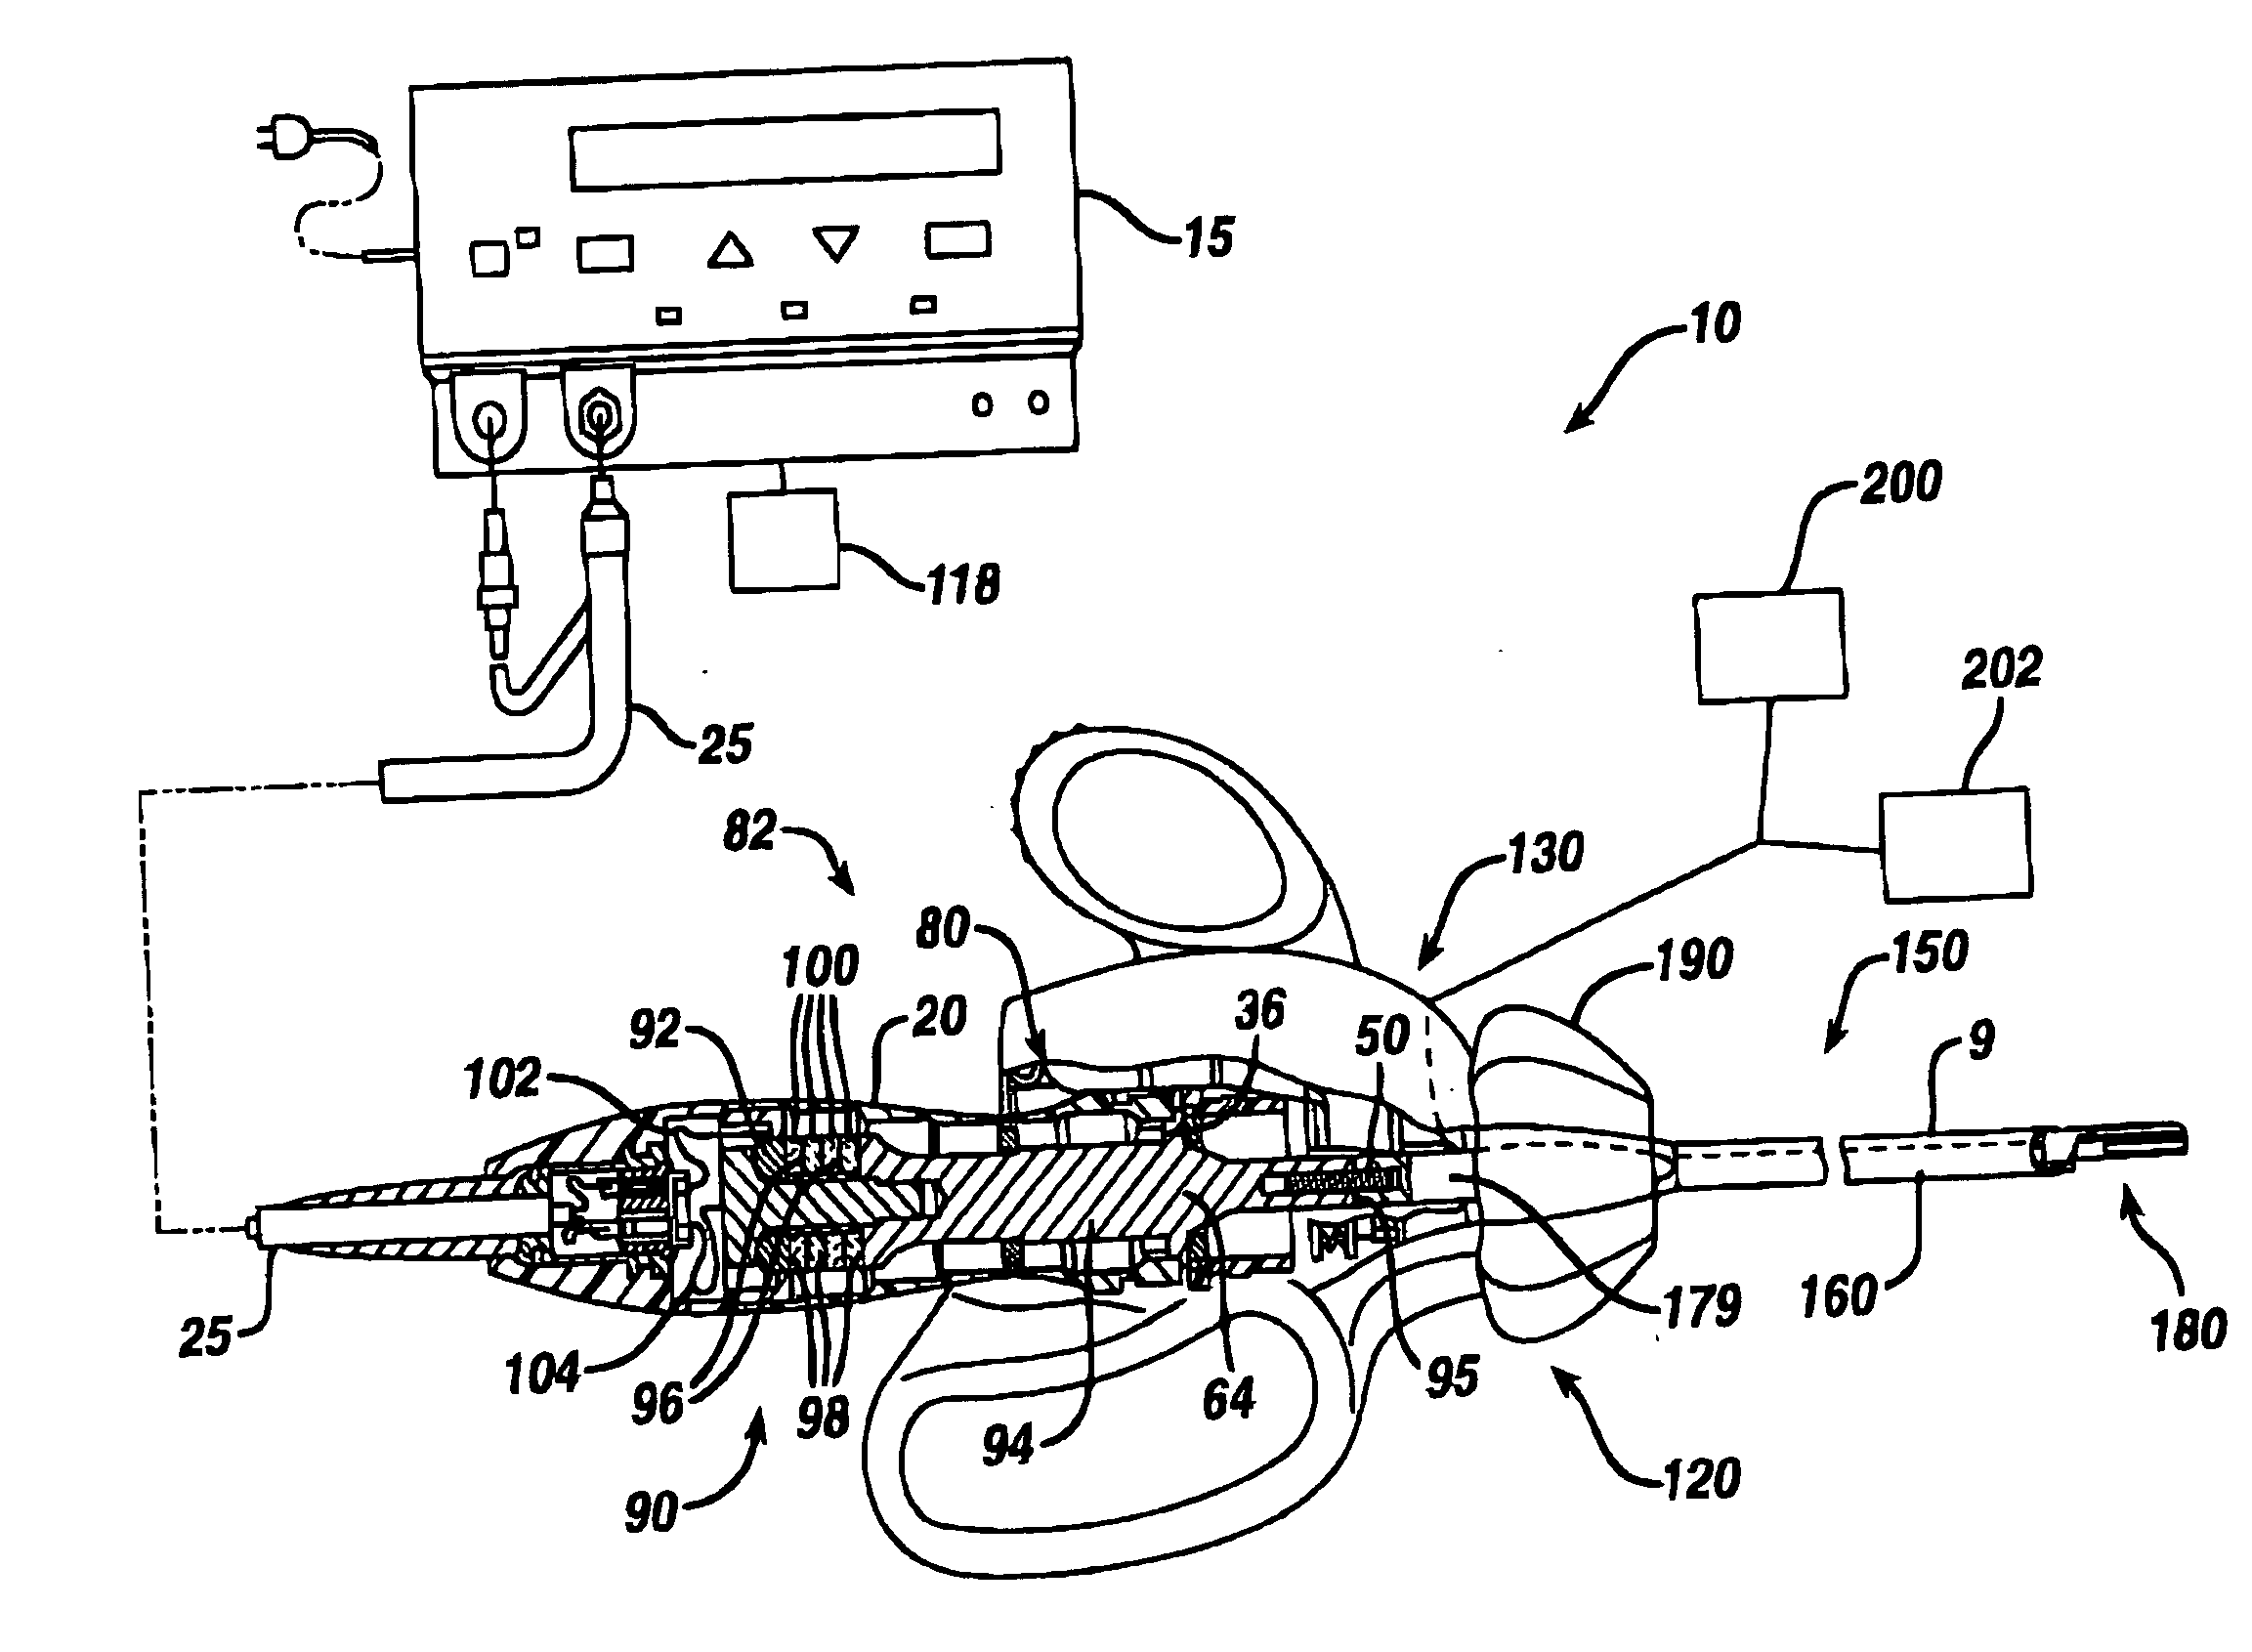 Ultrasonic surgical instrument incorporating fluid management